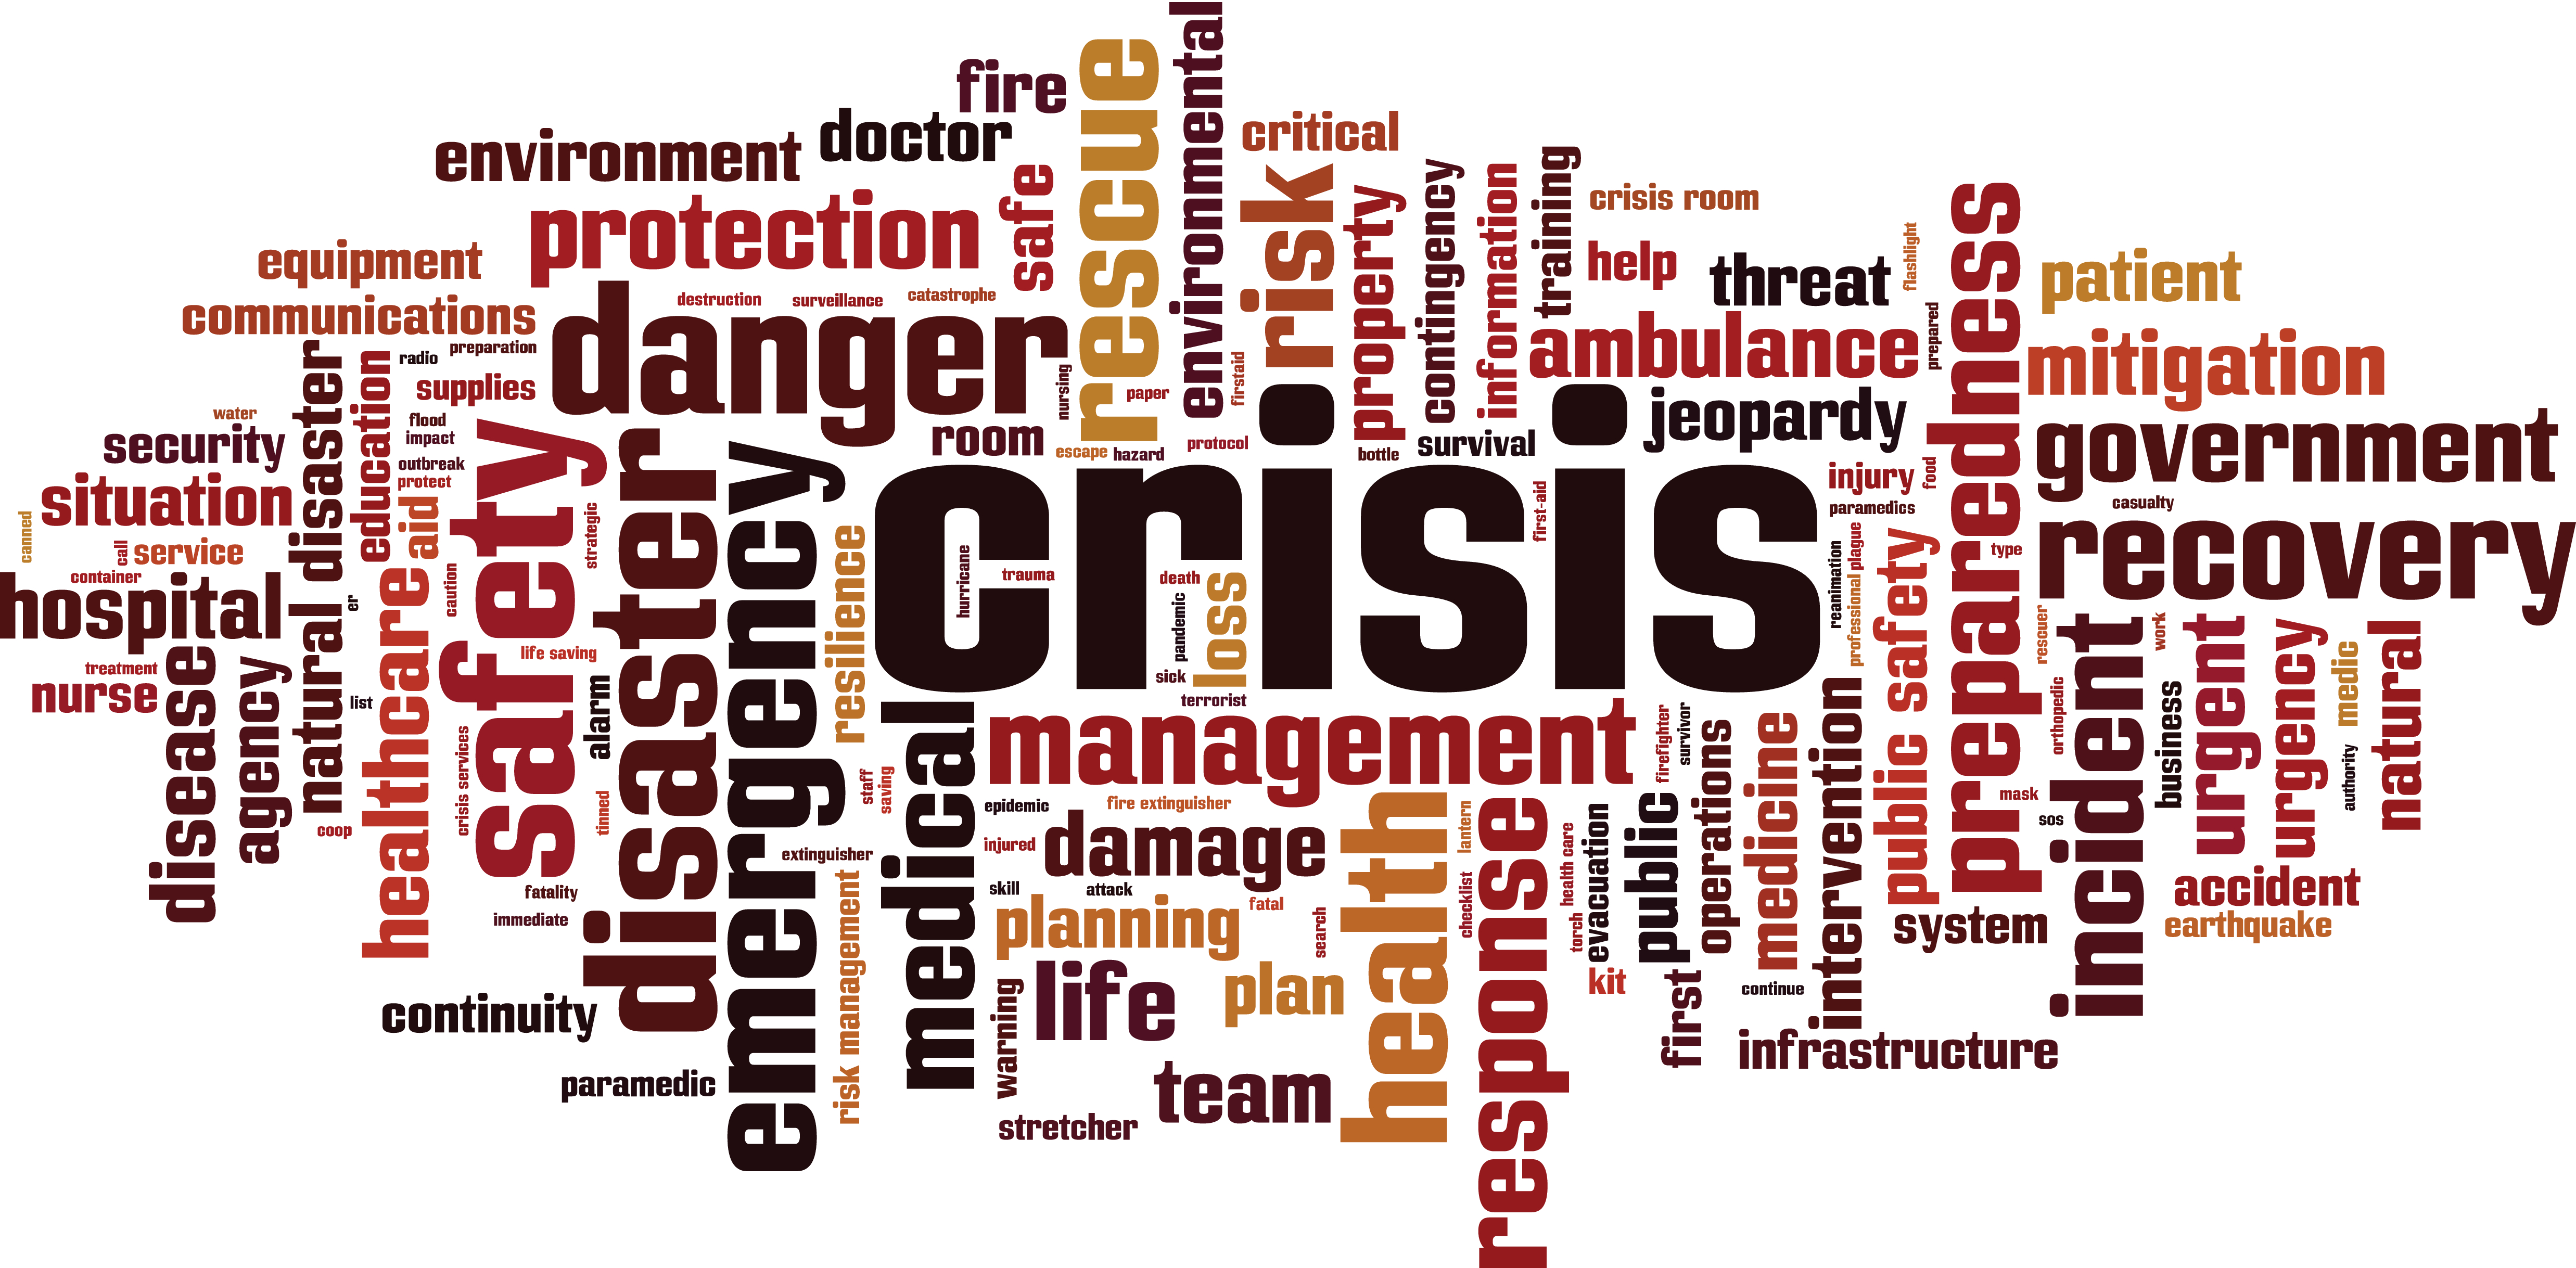 Contemporary Issues in Risk and Crisis Management - master